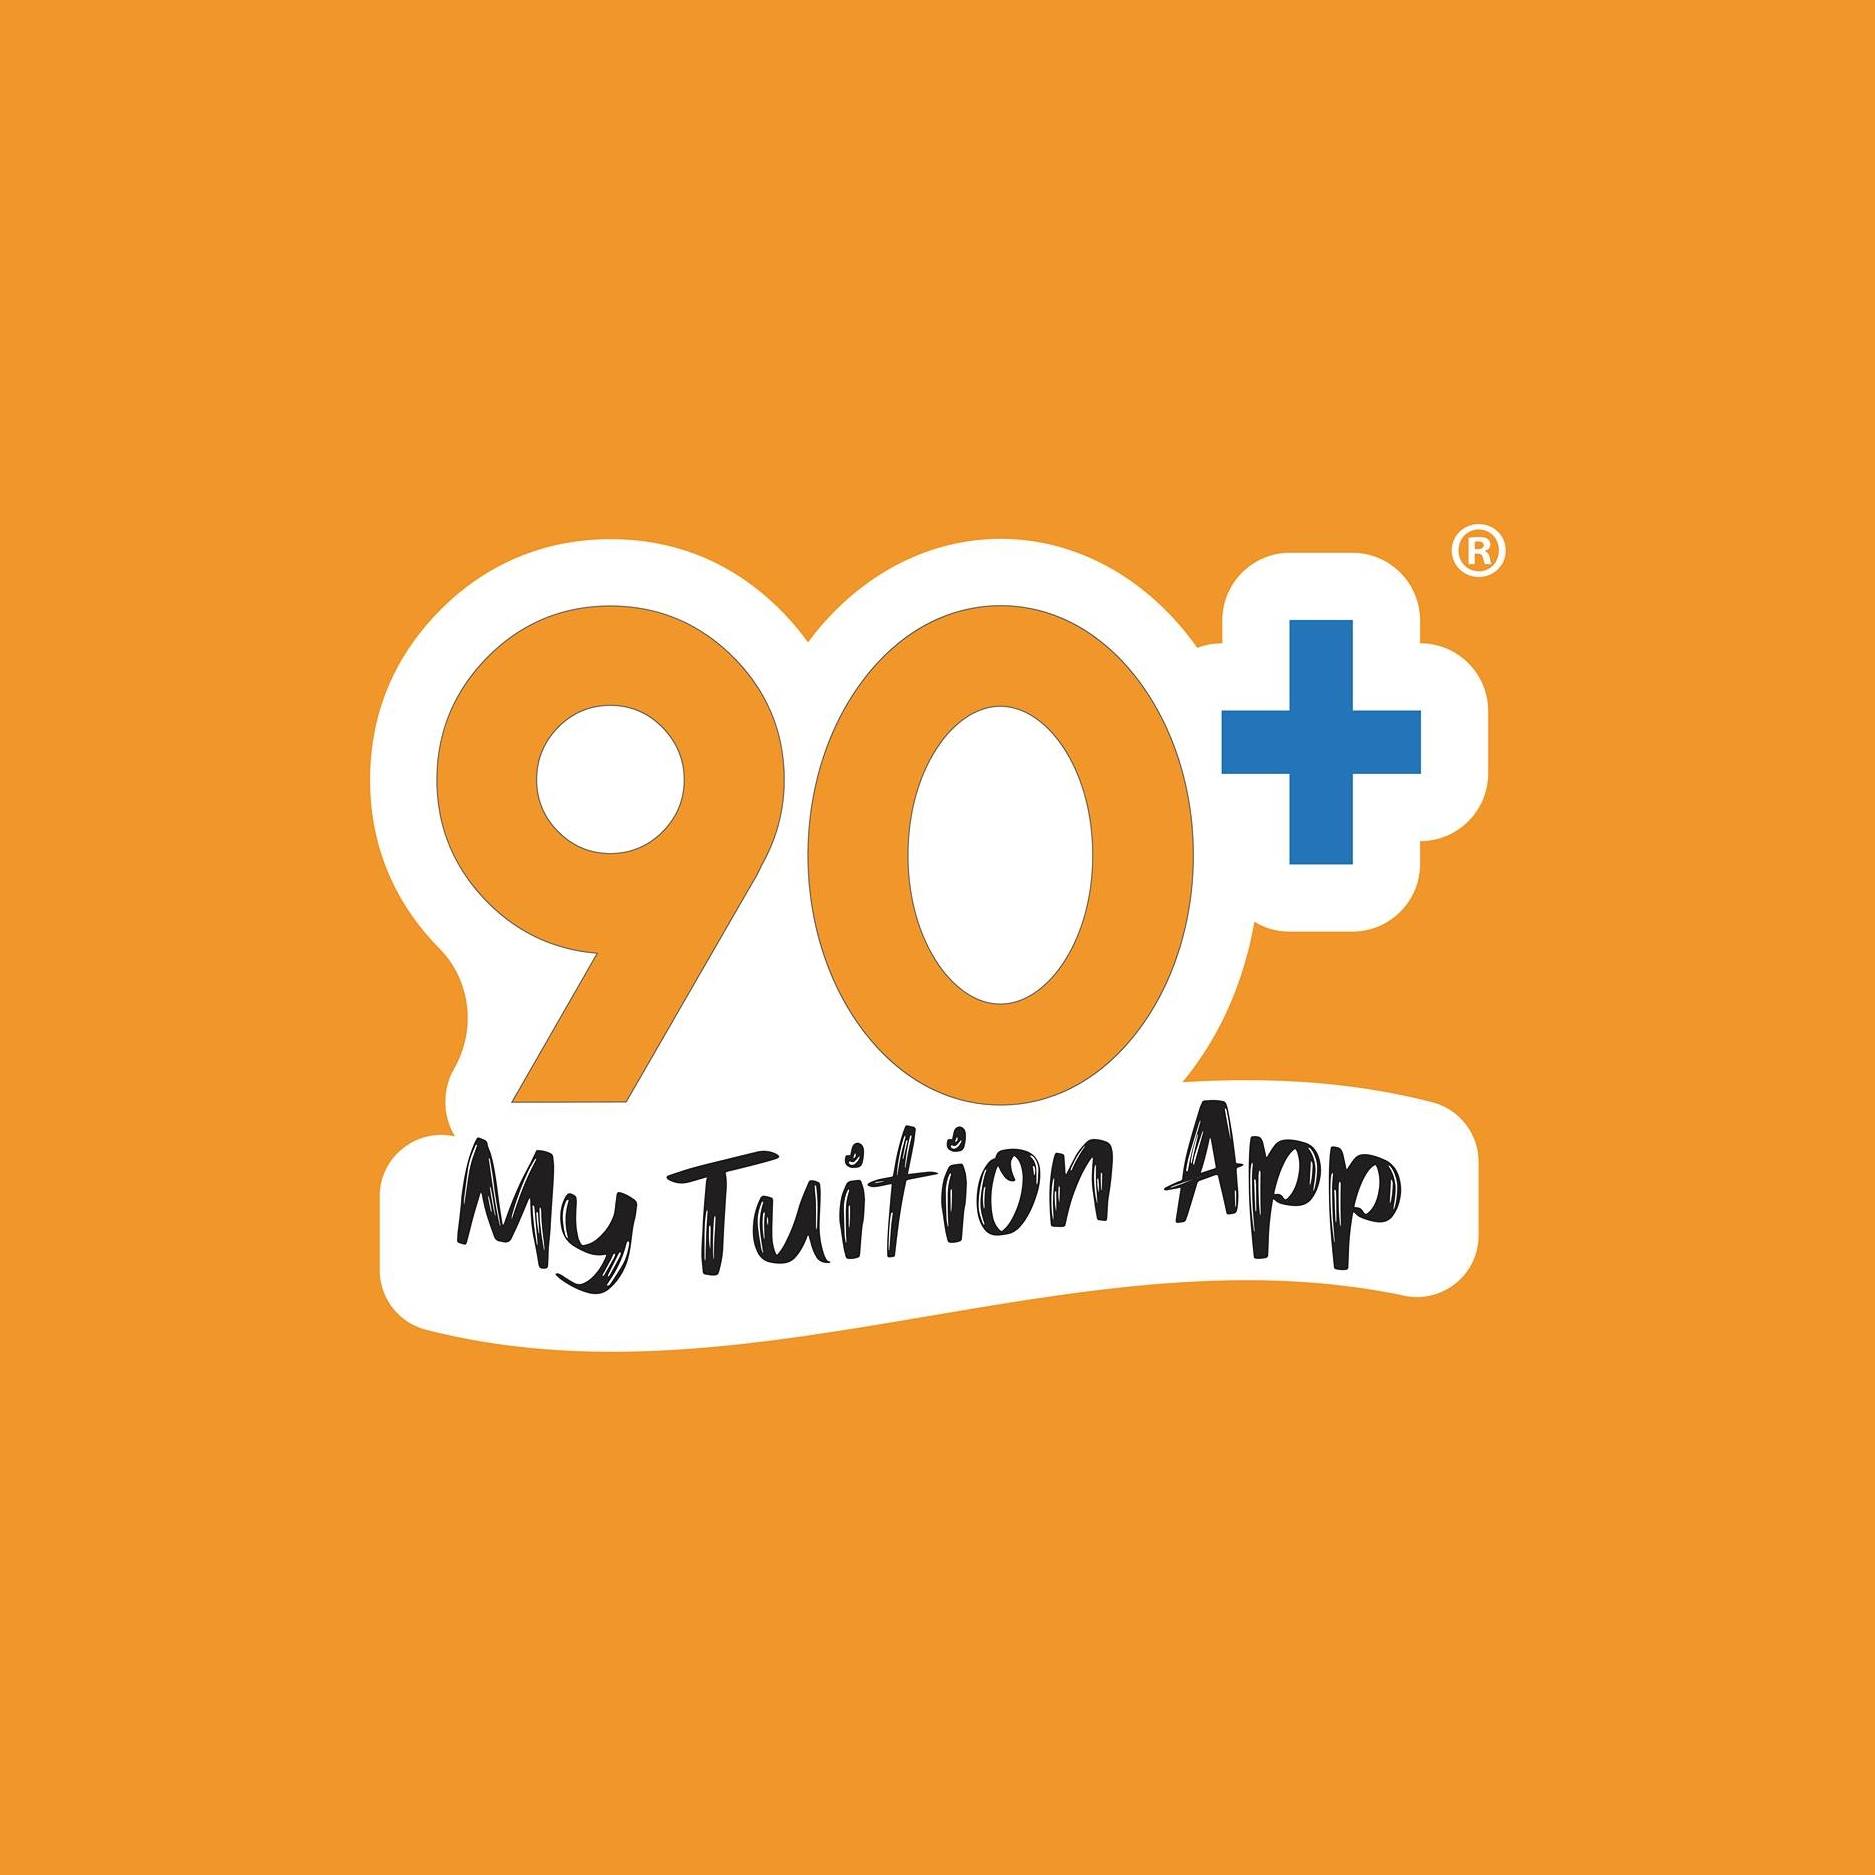 90+ My Tution App|Accounting Services|Professional Services